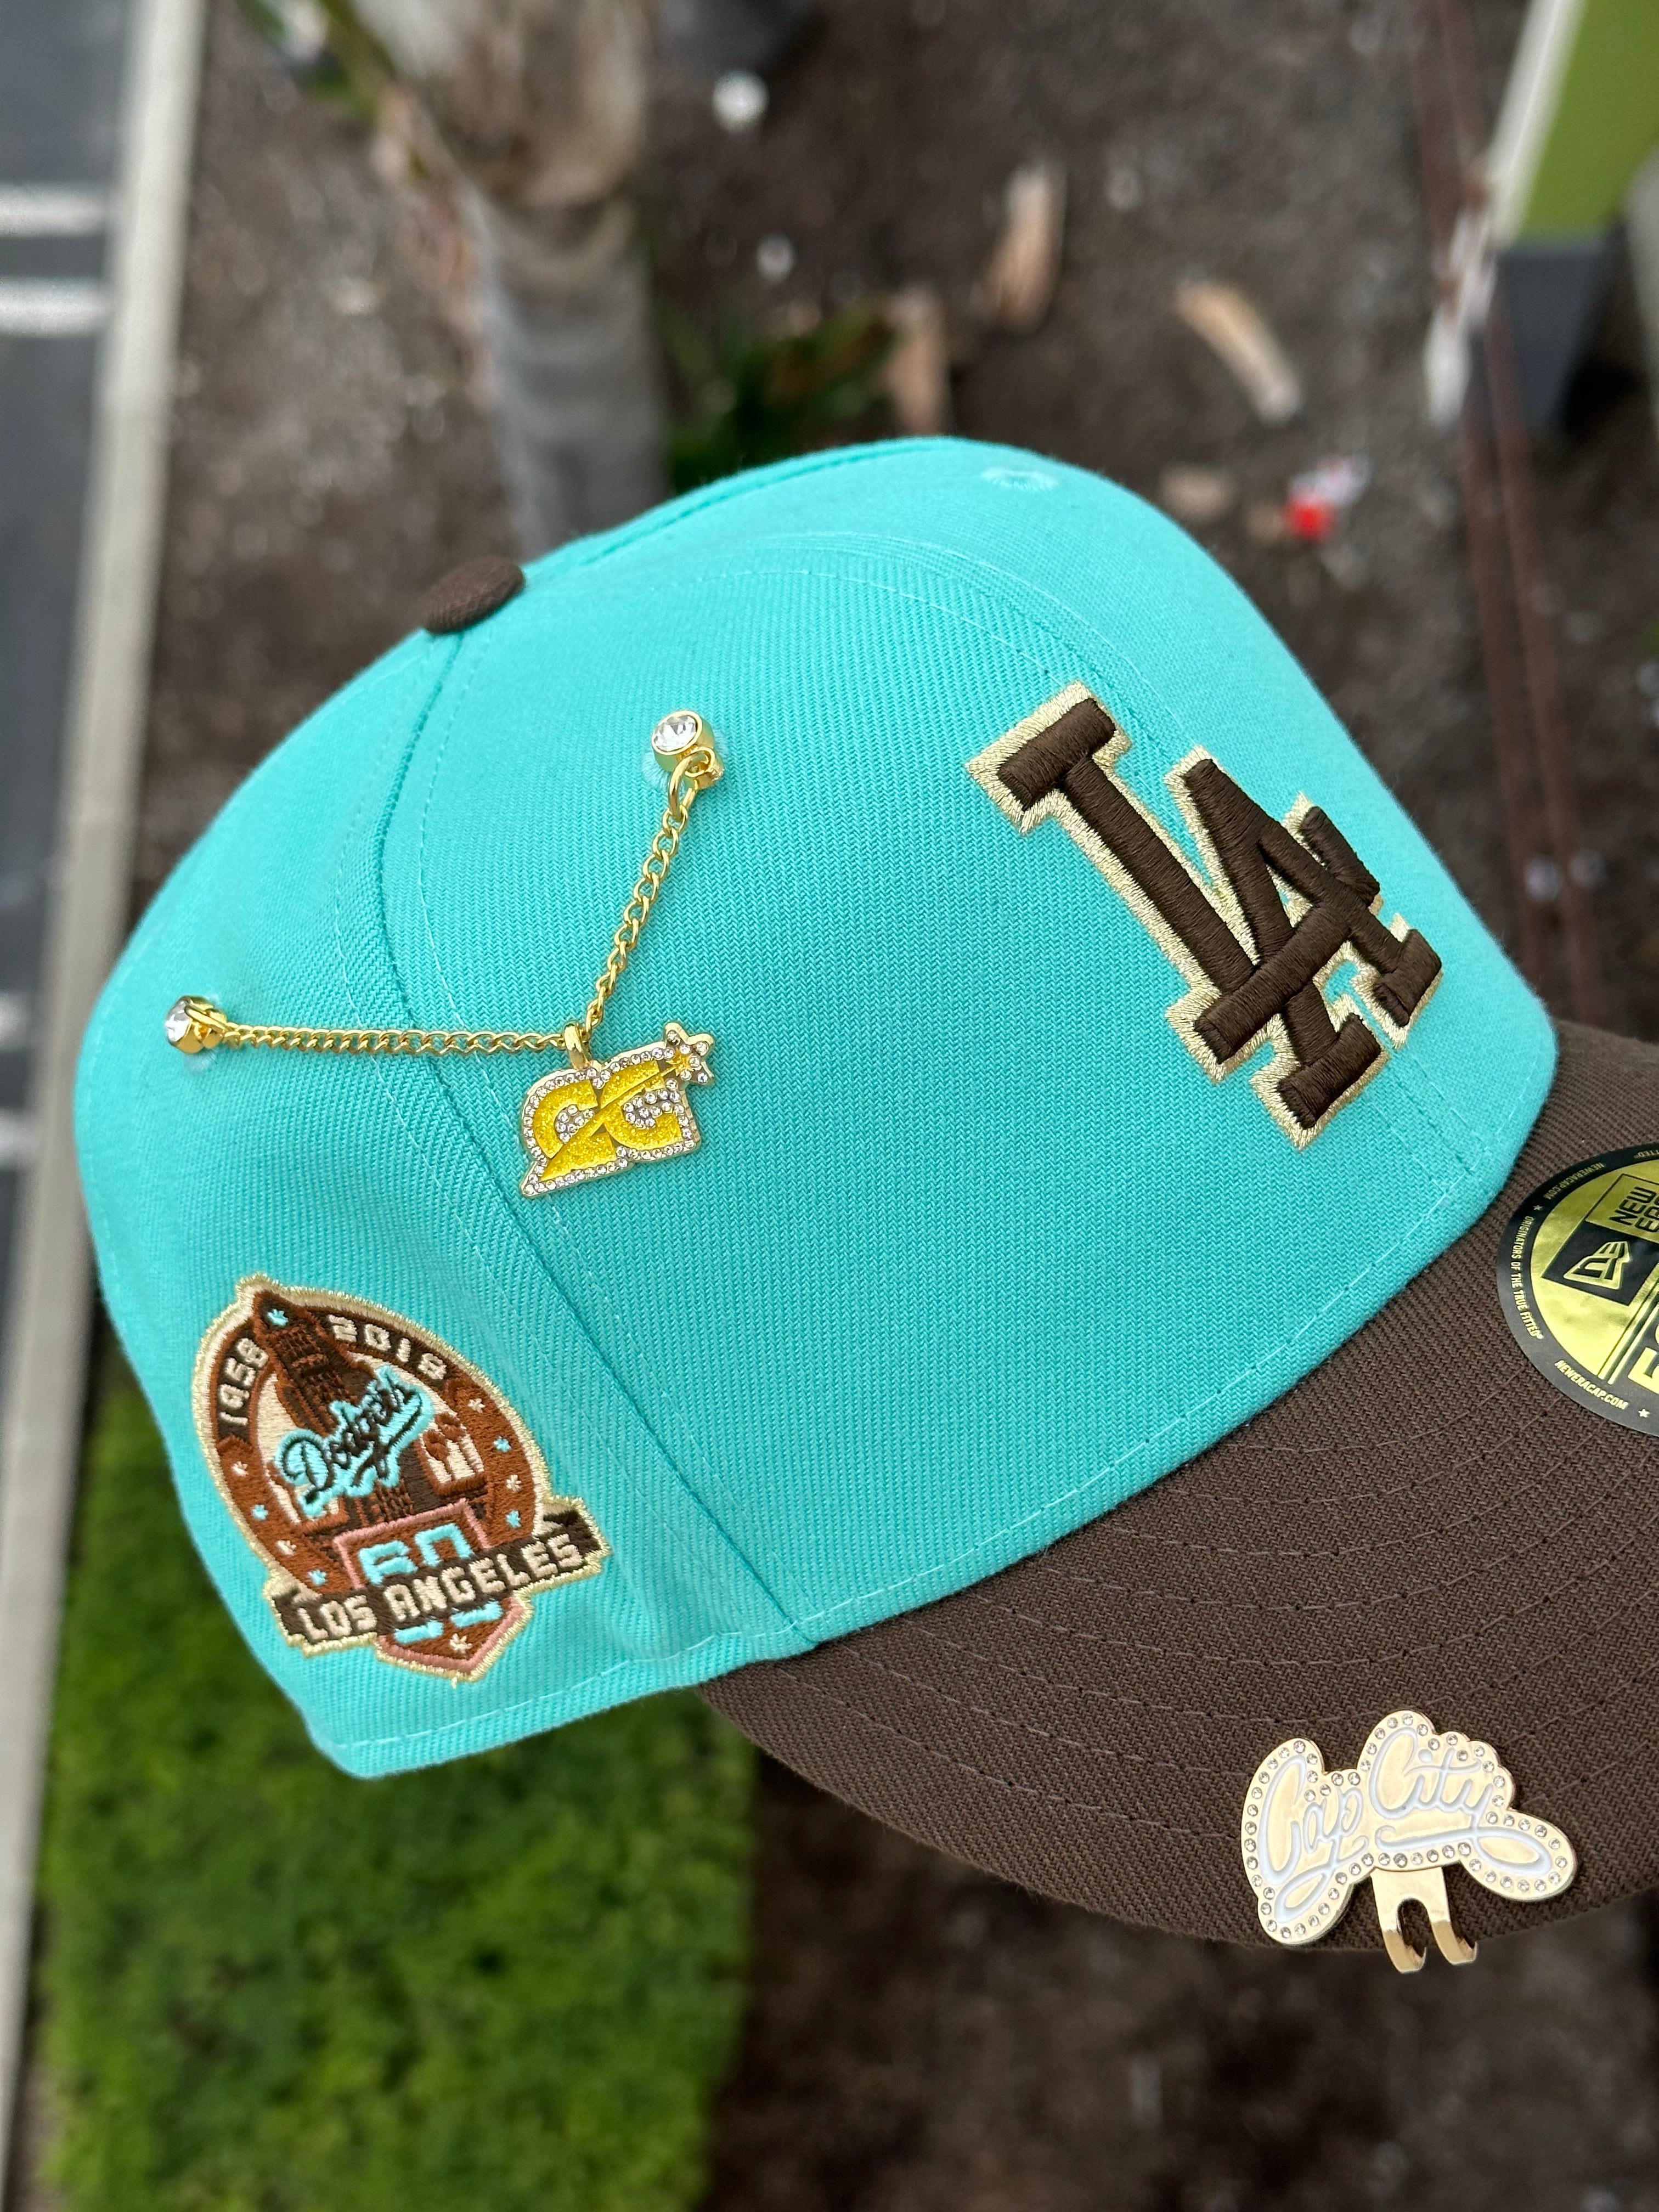 NEW ERA EXCLUSIVE 59FIFTY MINT/WALNUT LOS ANGELES DODGERS W/ 60TH ANNIVERSARY PATCH